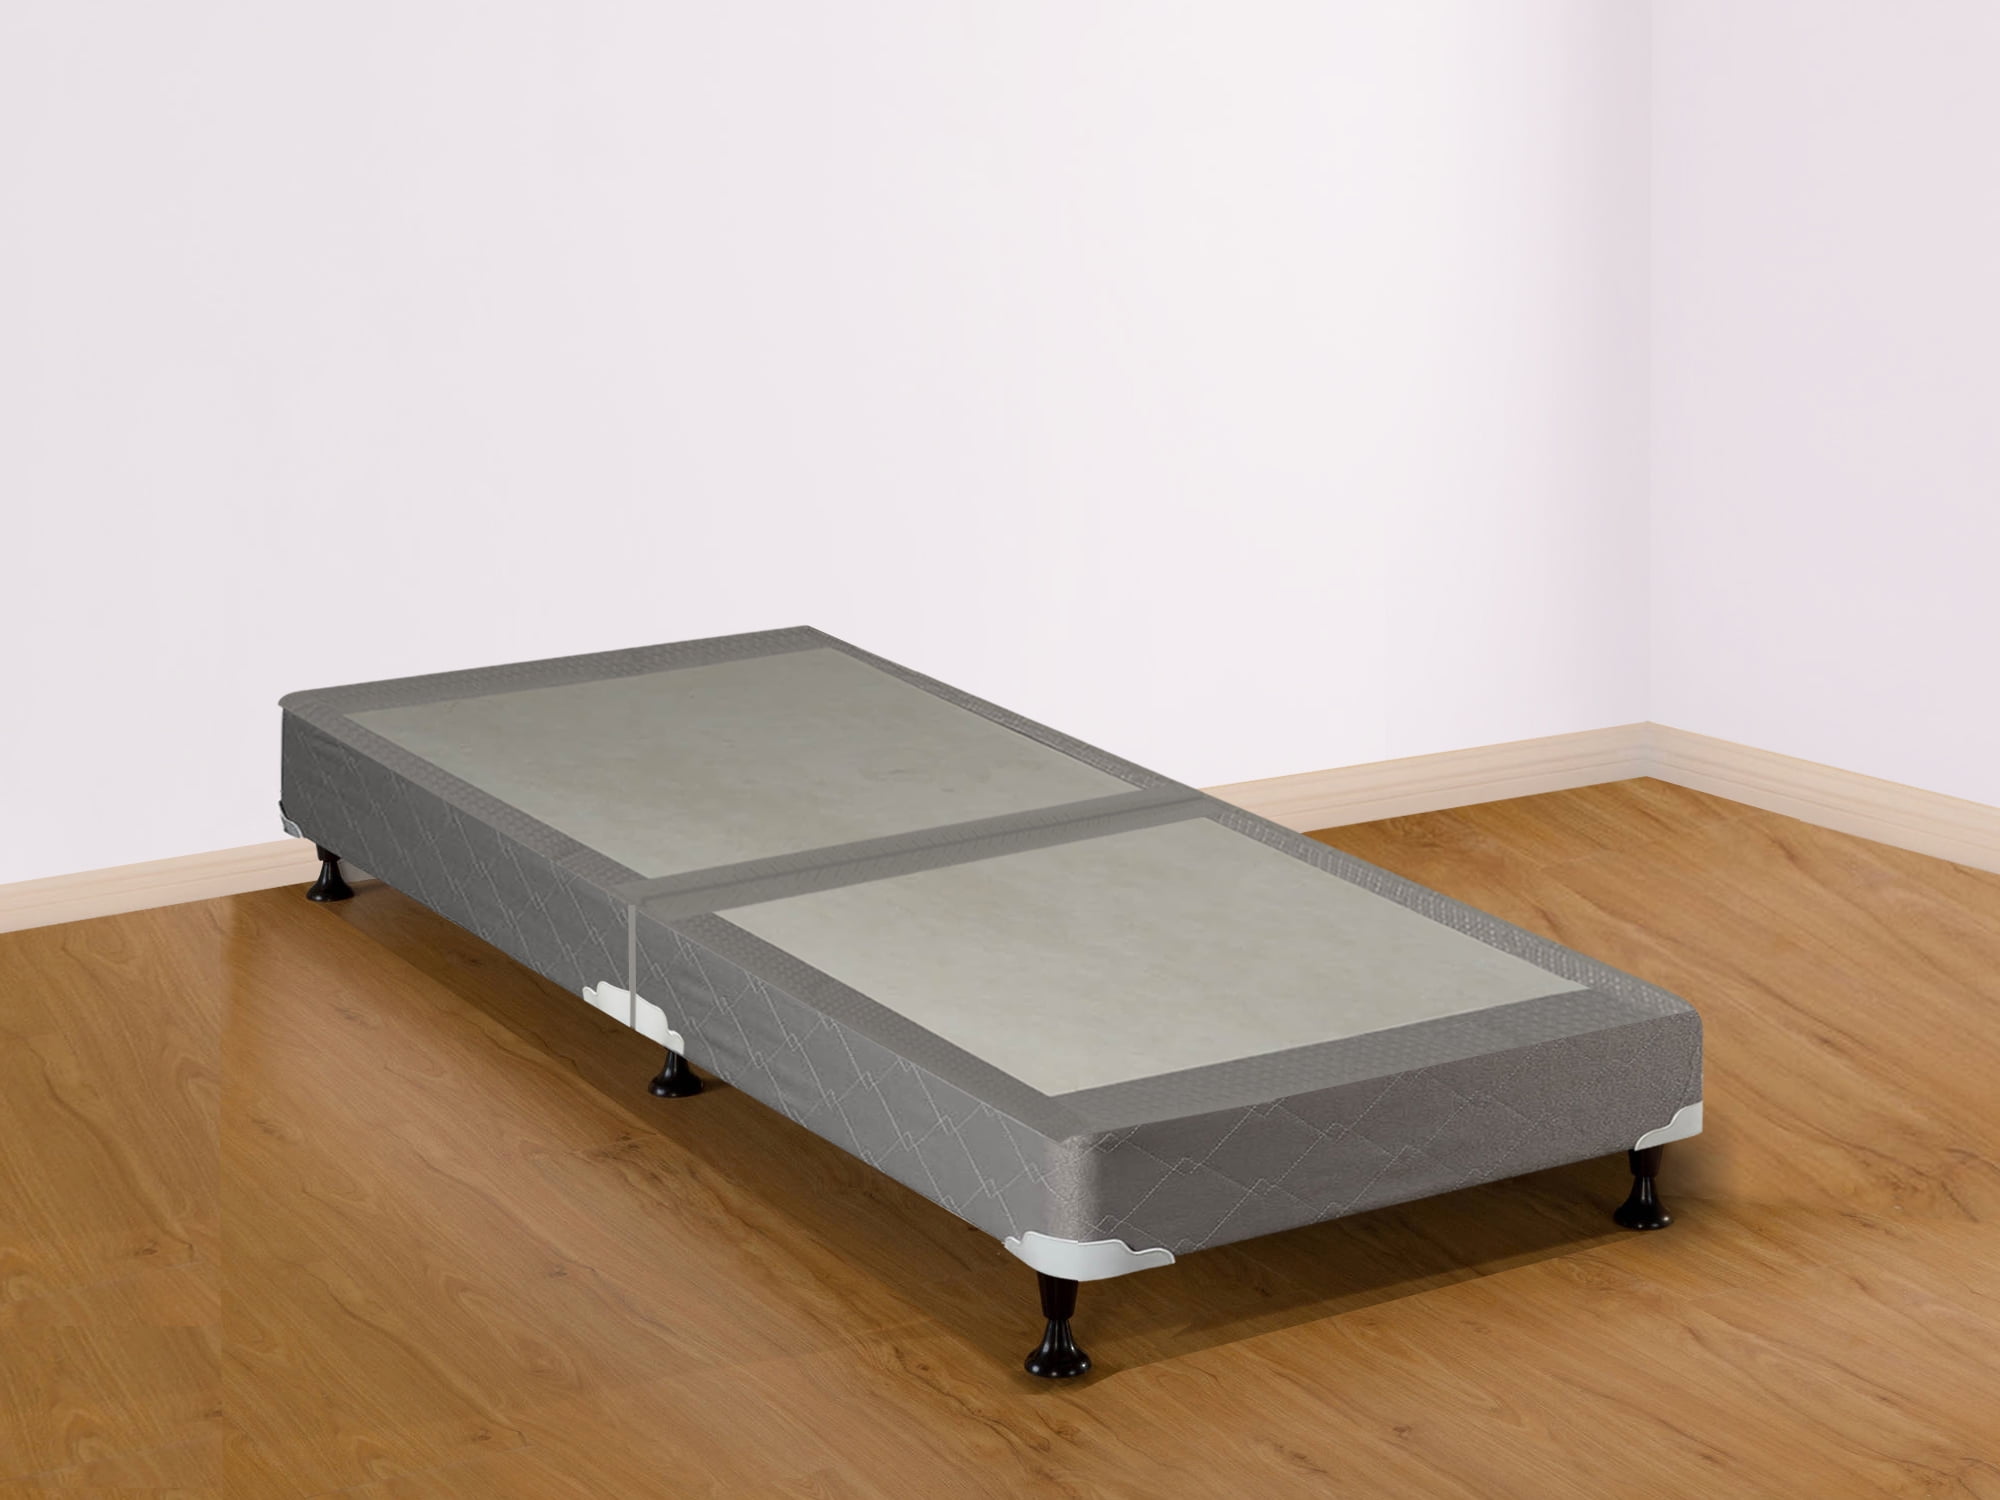 double mattress instead of box spring